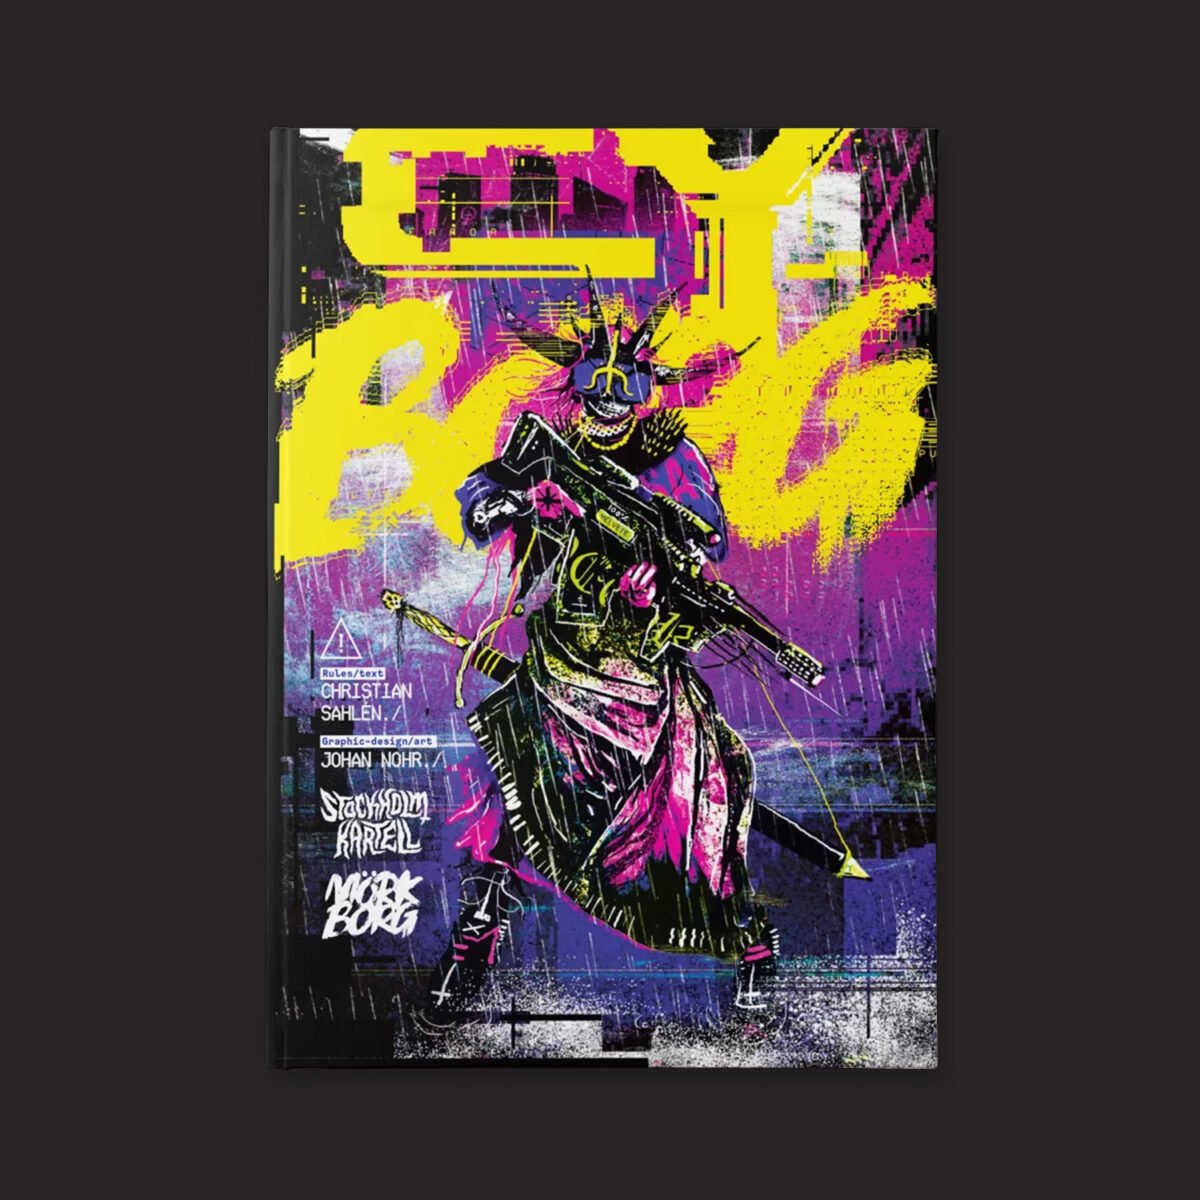 Gritty retro in neon yellow, pink, purple, and black, with a character wearing a sword and punk leather outfit, holding a gun,